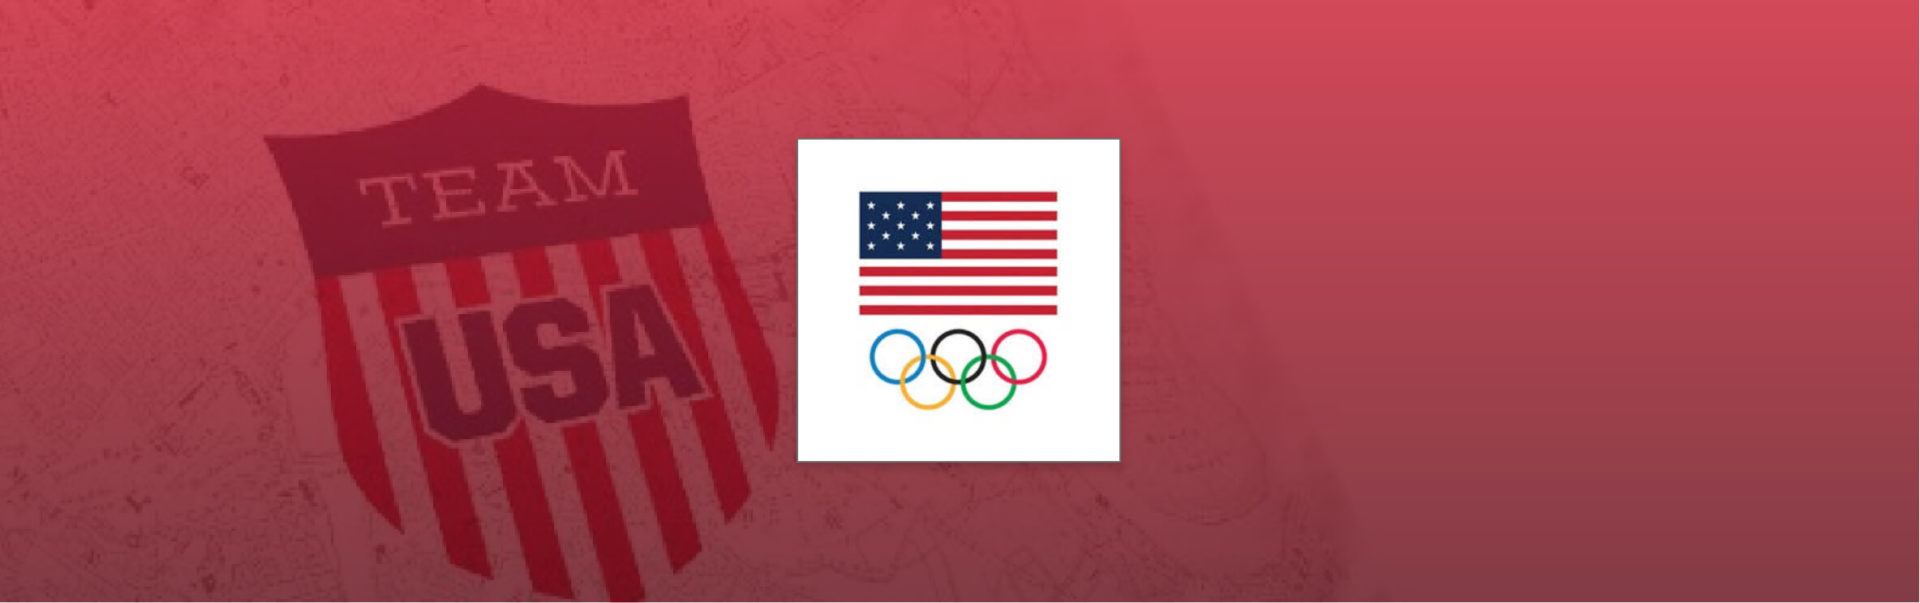 Sourcing and customizing unisex gifts for the US Olympic Committee